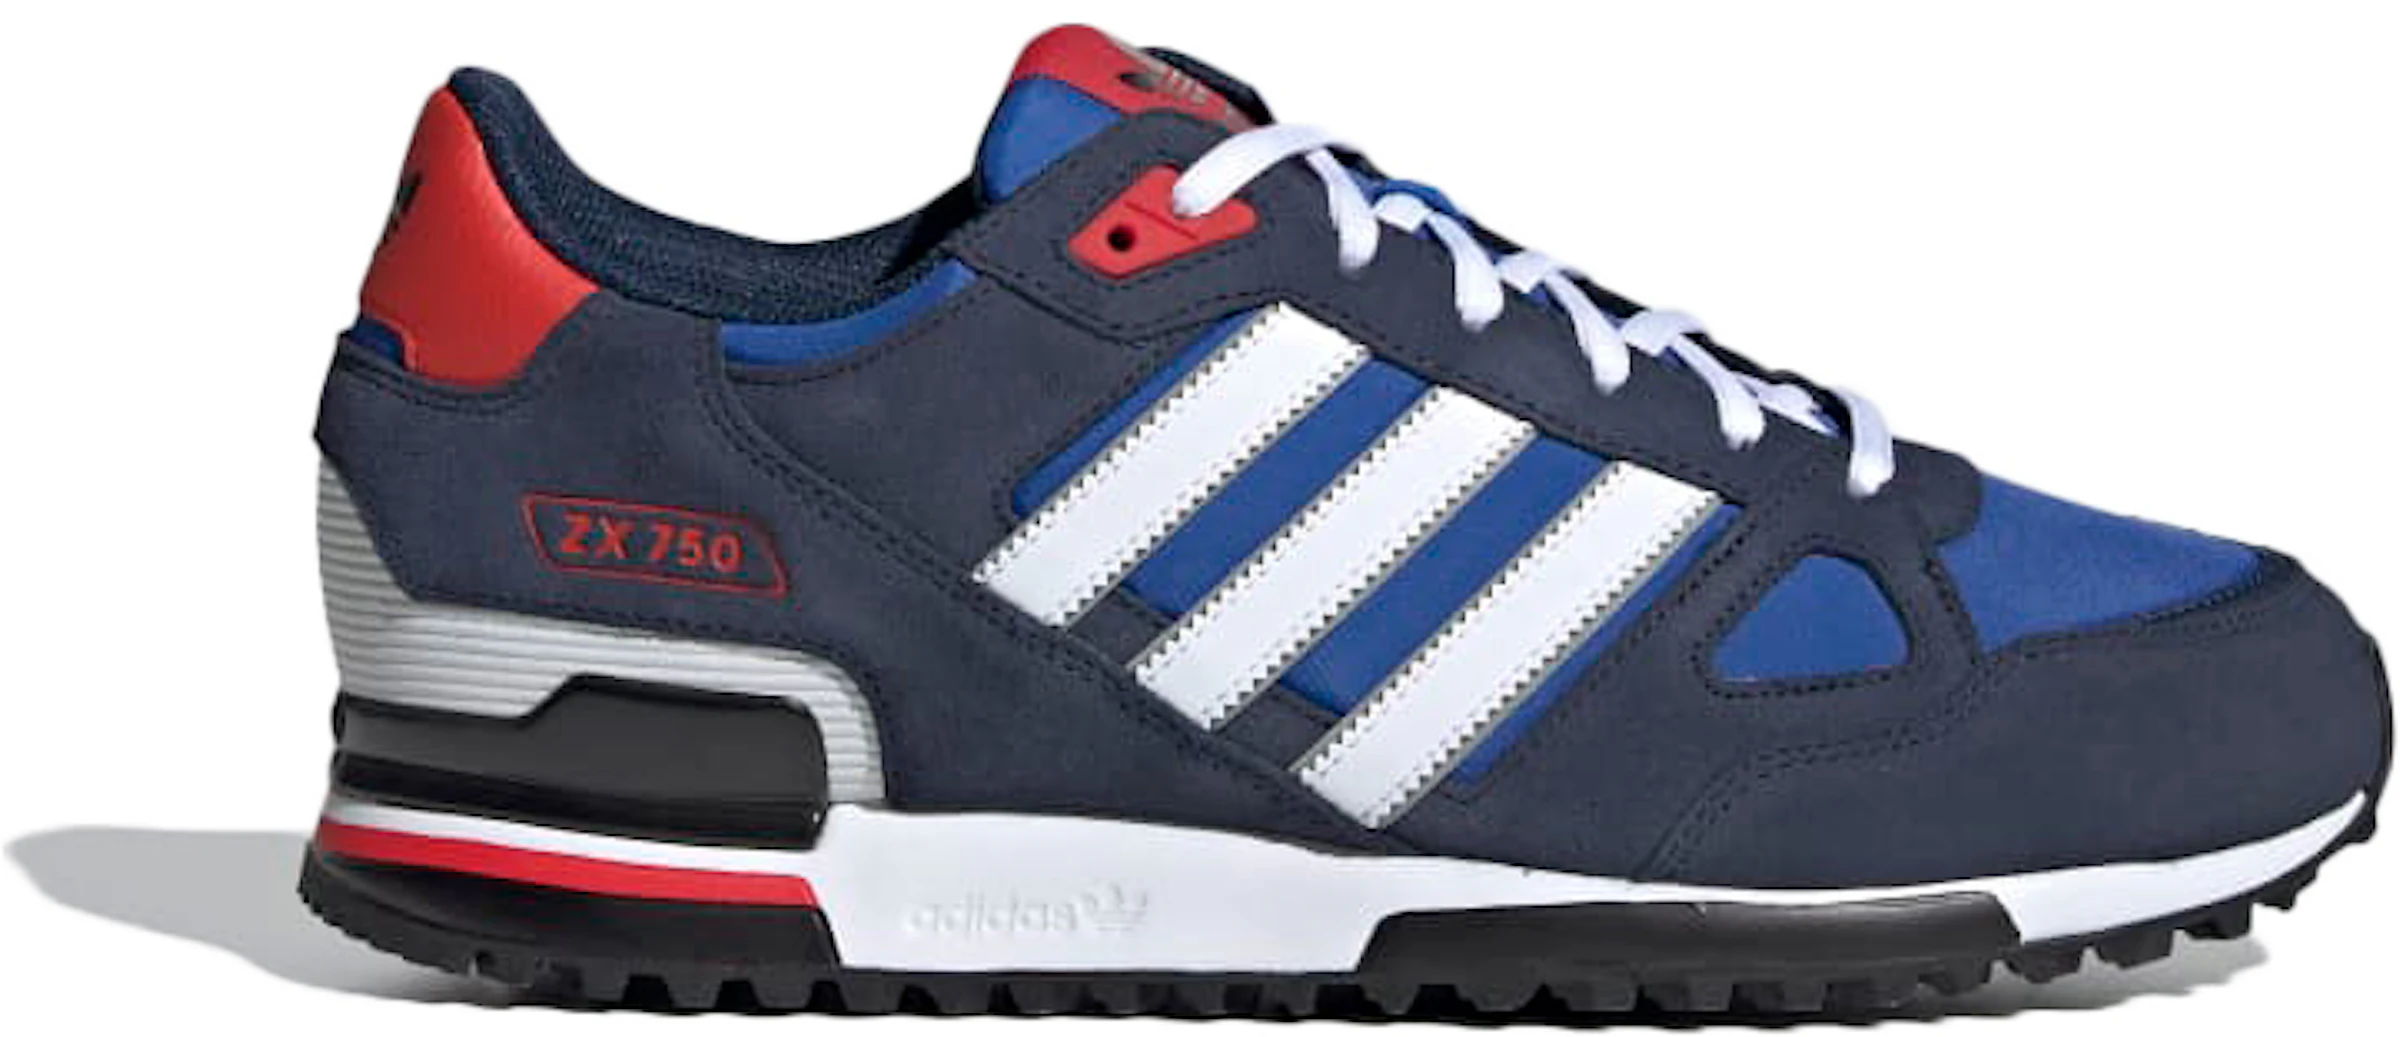 Adidas ZX 750 Sneakers In Colors RunRepeat | vlr.eng.br